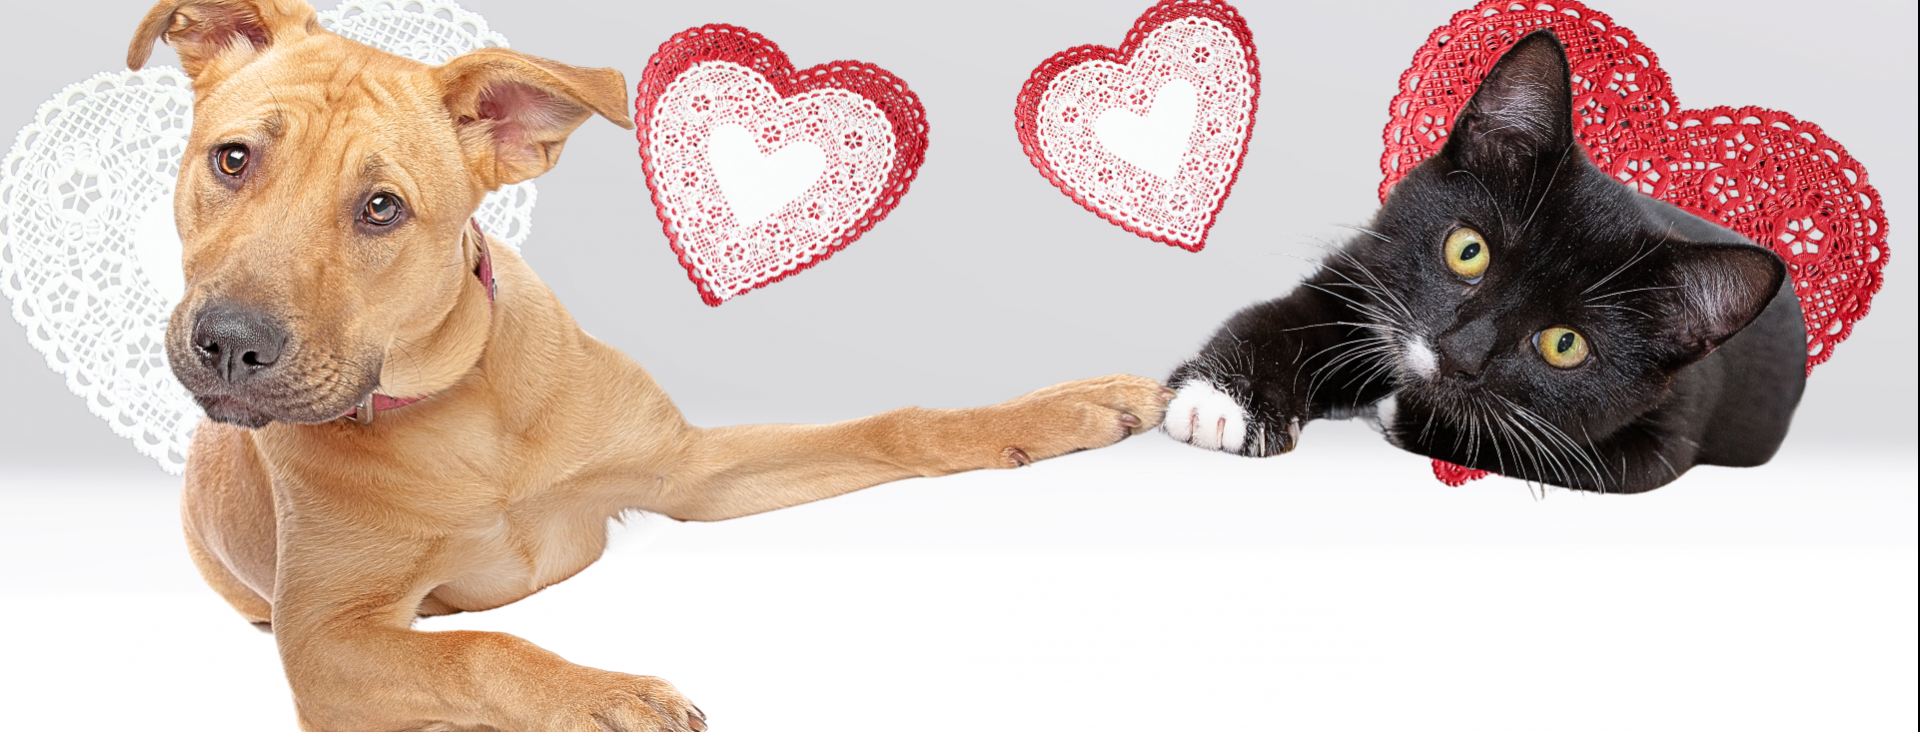 A valentine's day dog and cat